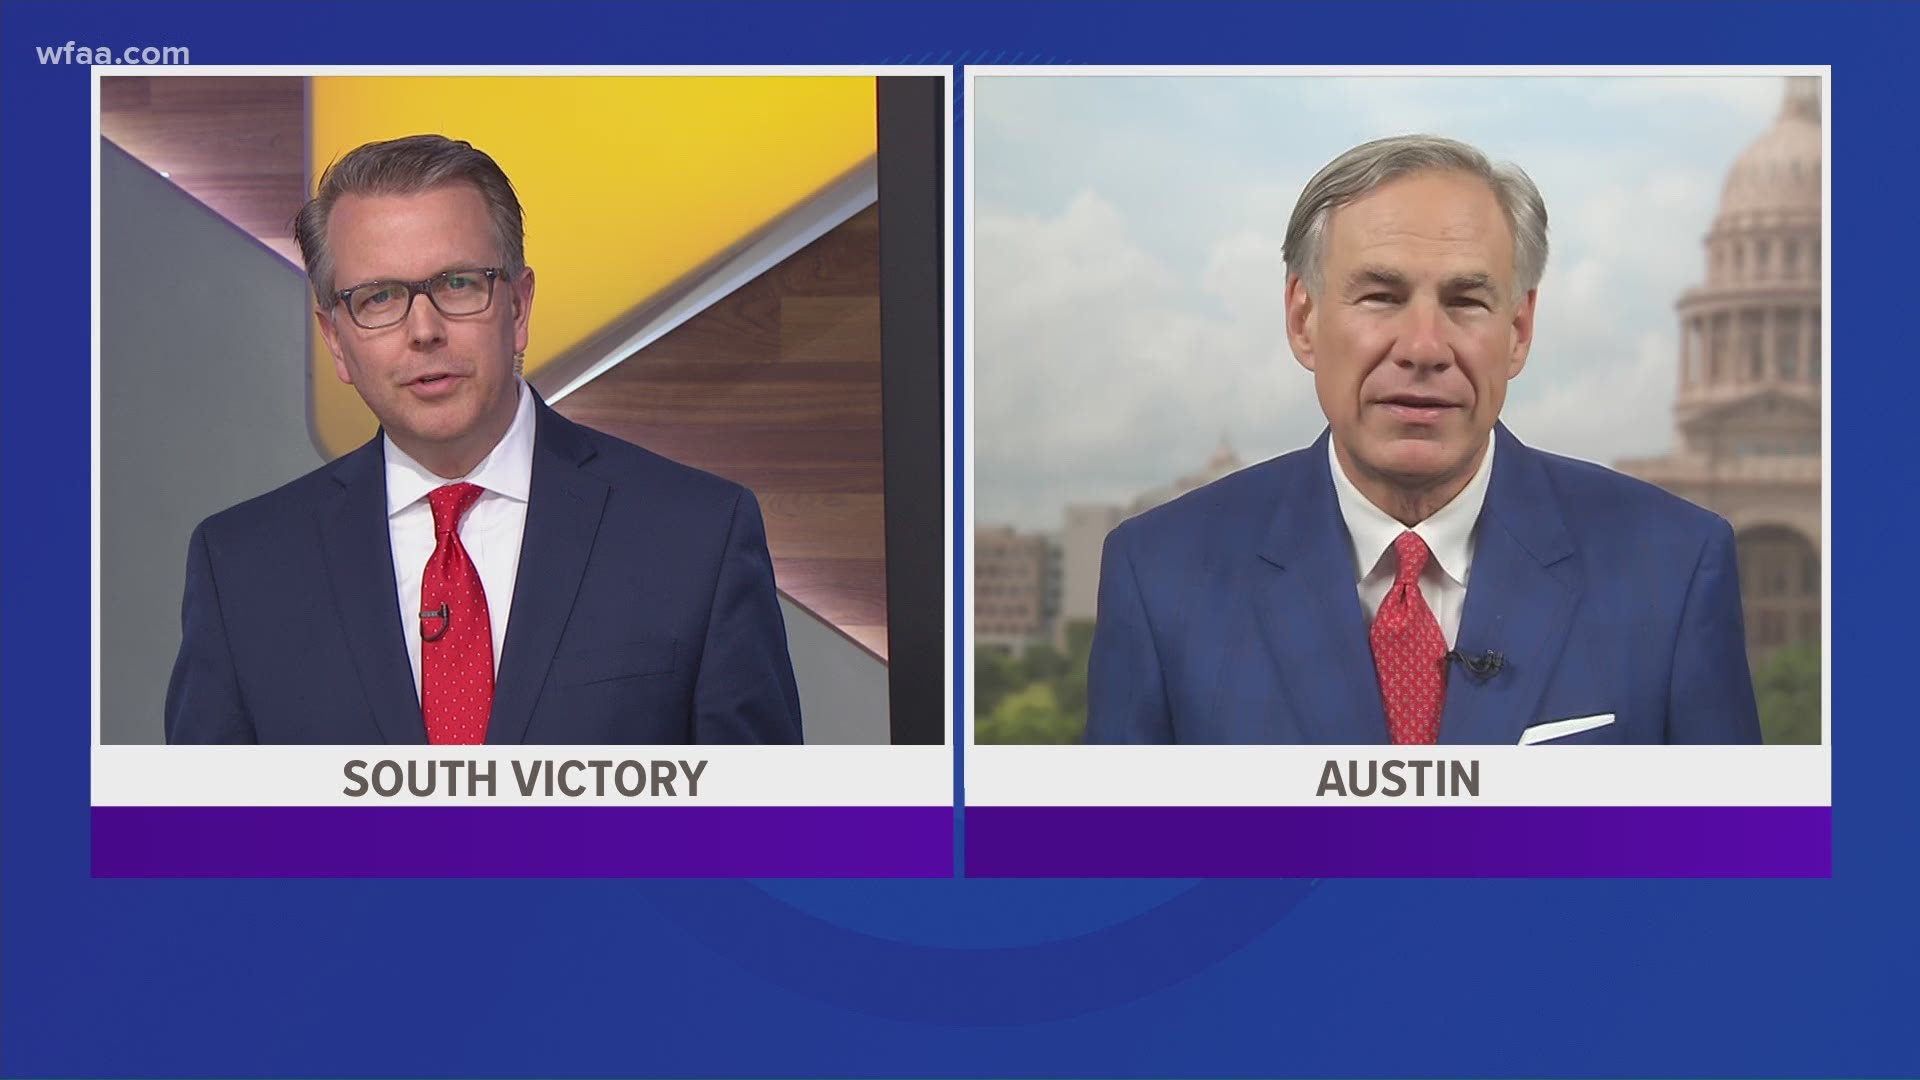 In a live interview on WFAA, Texas Gov. Greg Abbott said he believes the three other officers who were fired in Minnesota will also face criminal charges.